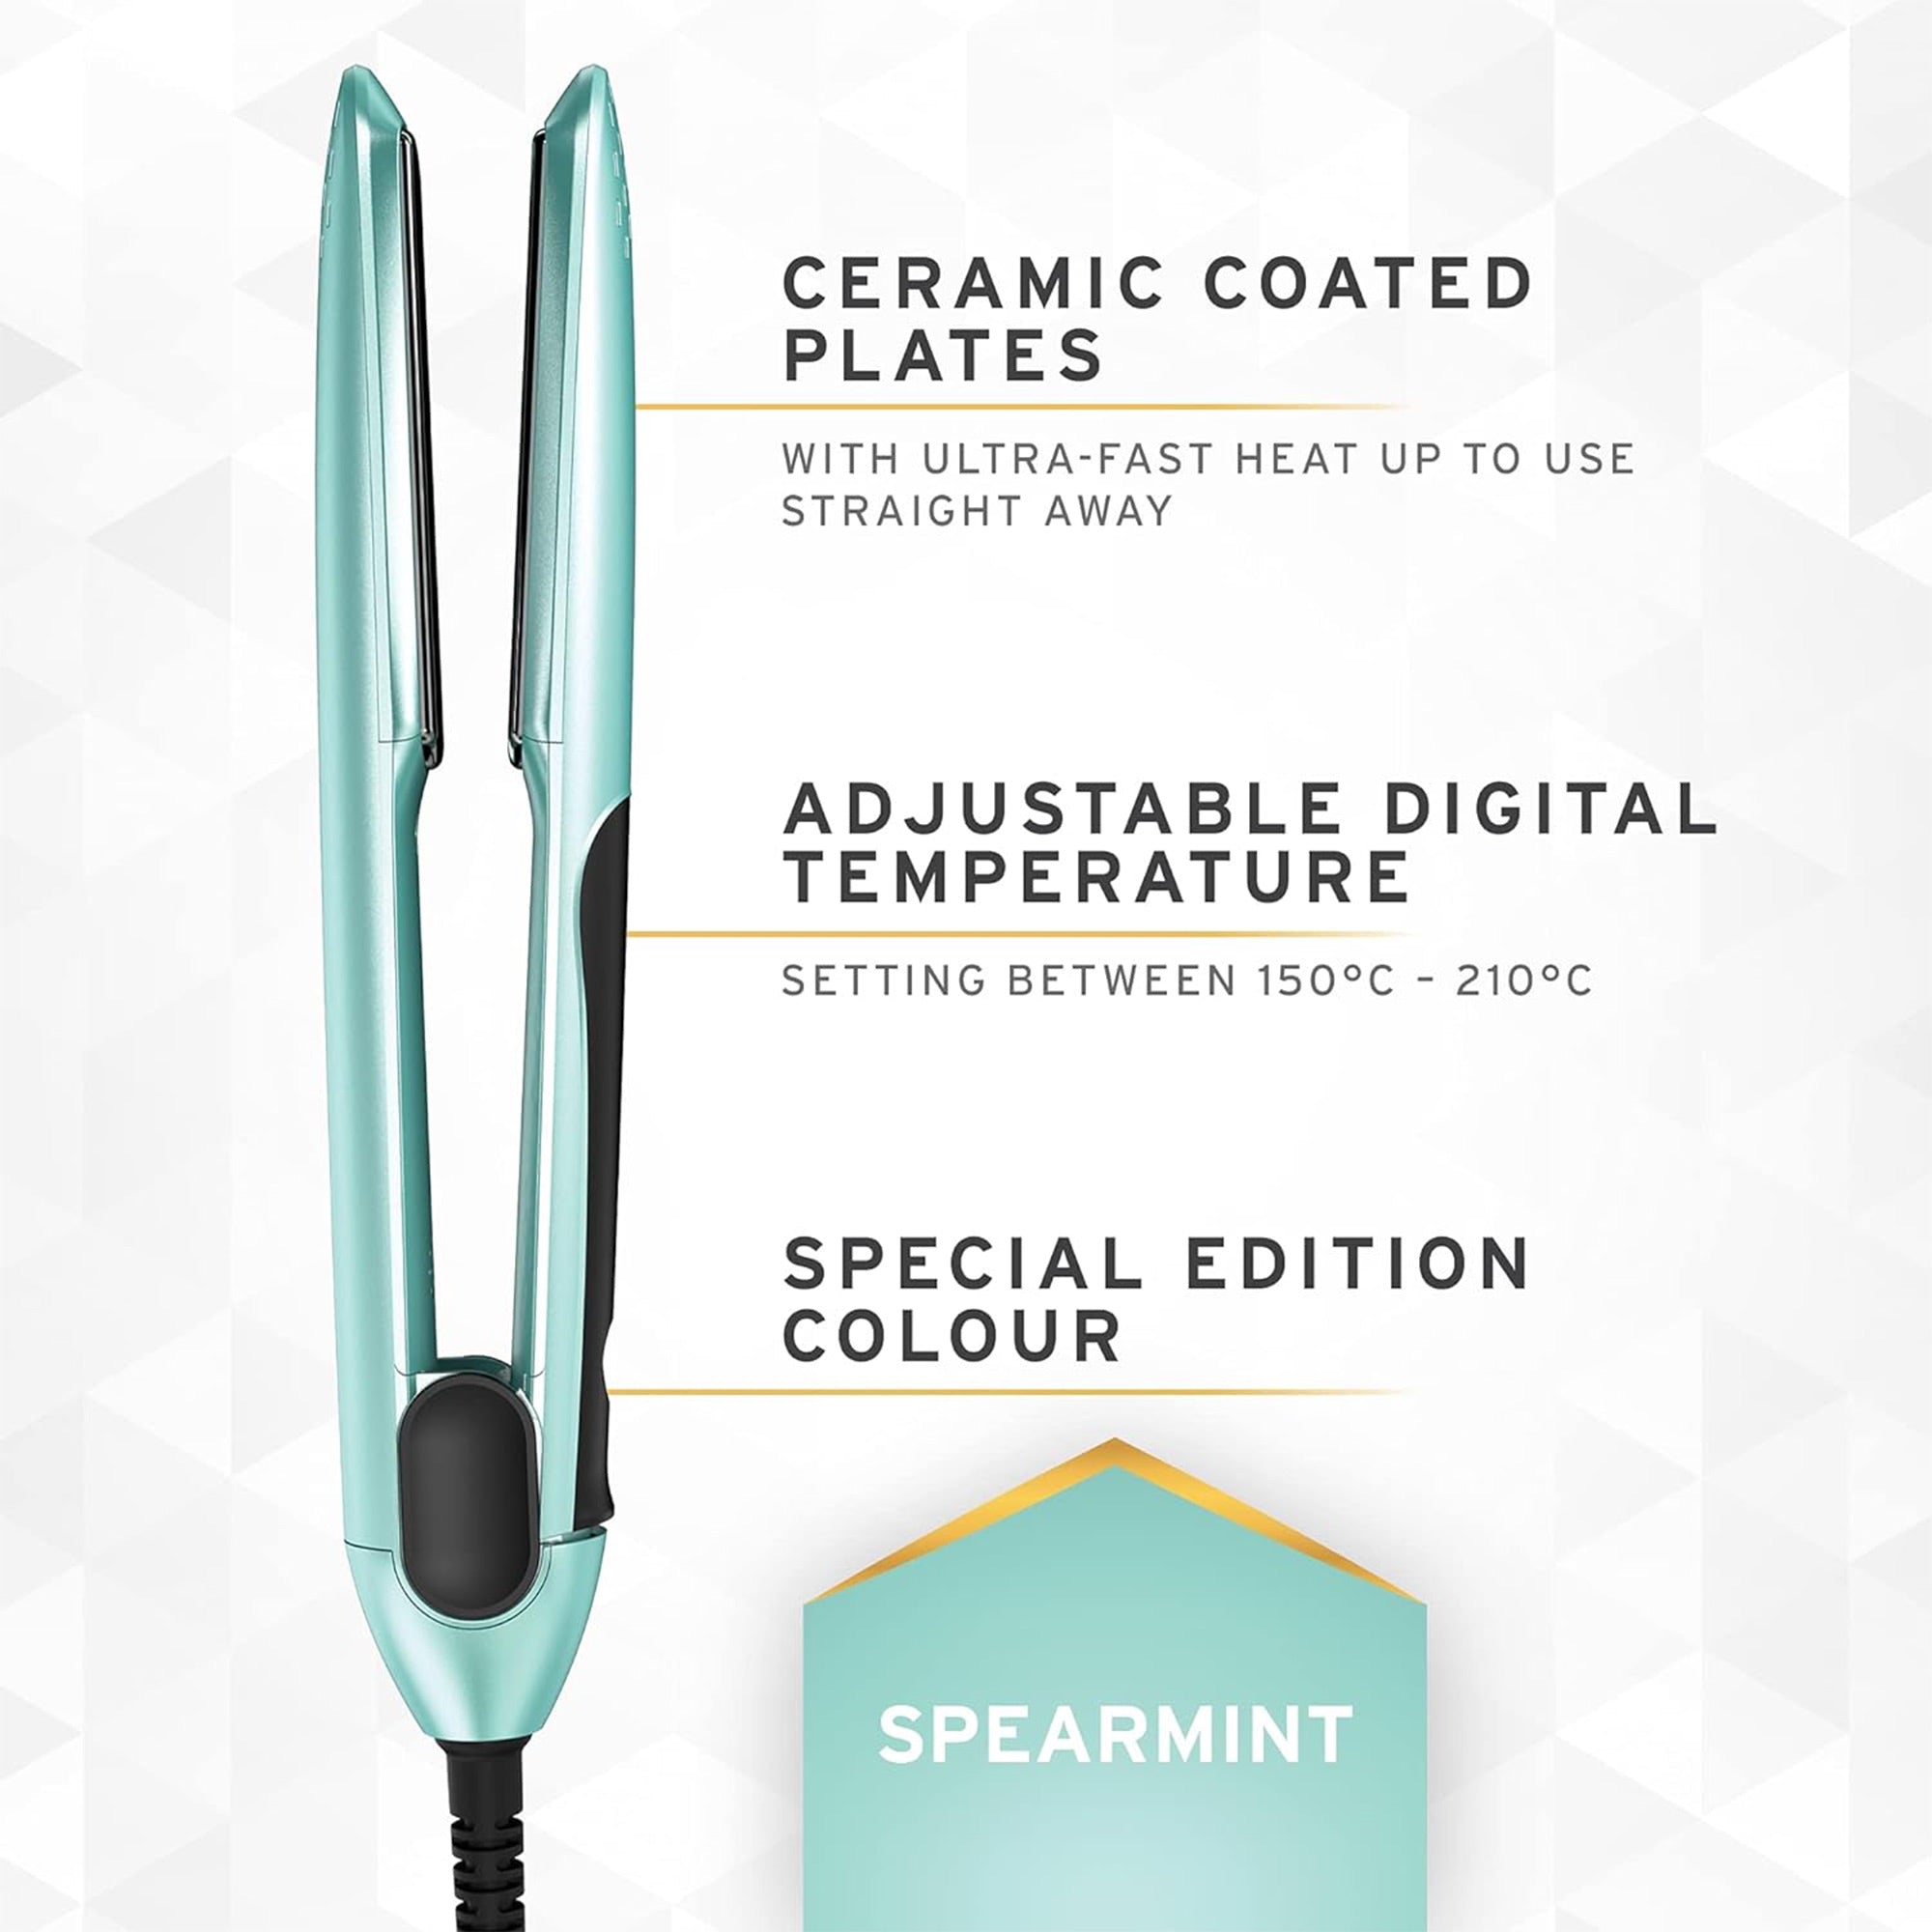 Wahl - Pro Glide Straightener Special Edition Spearmint